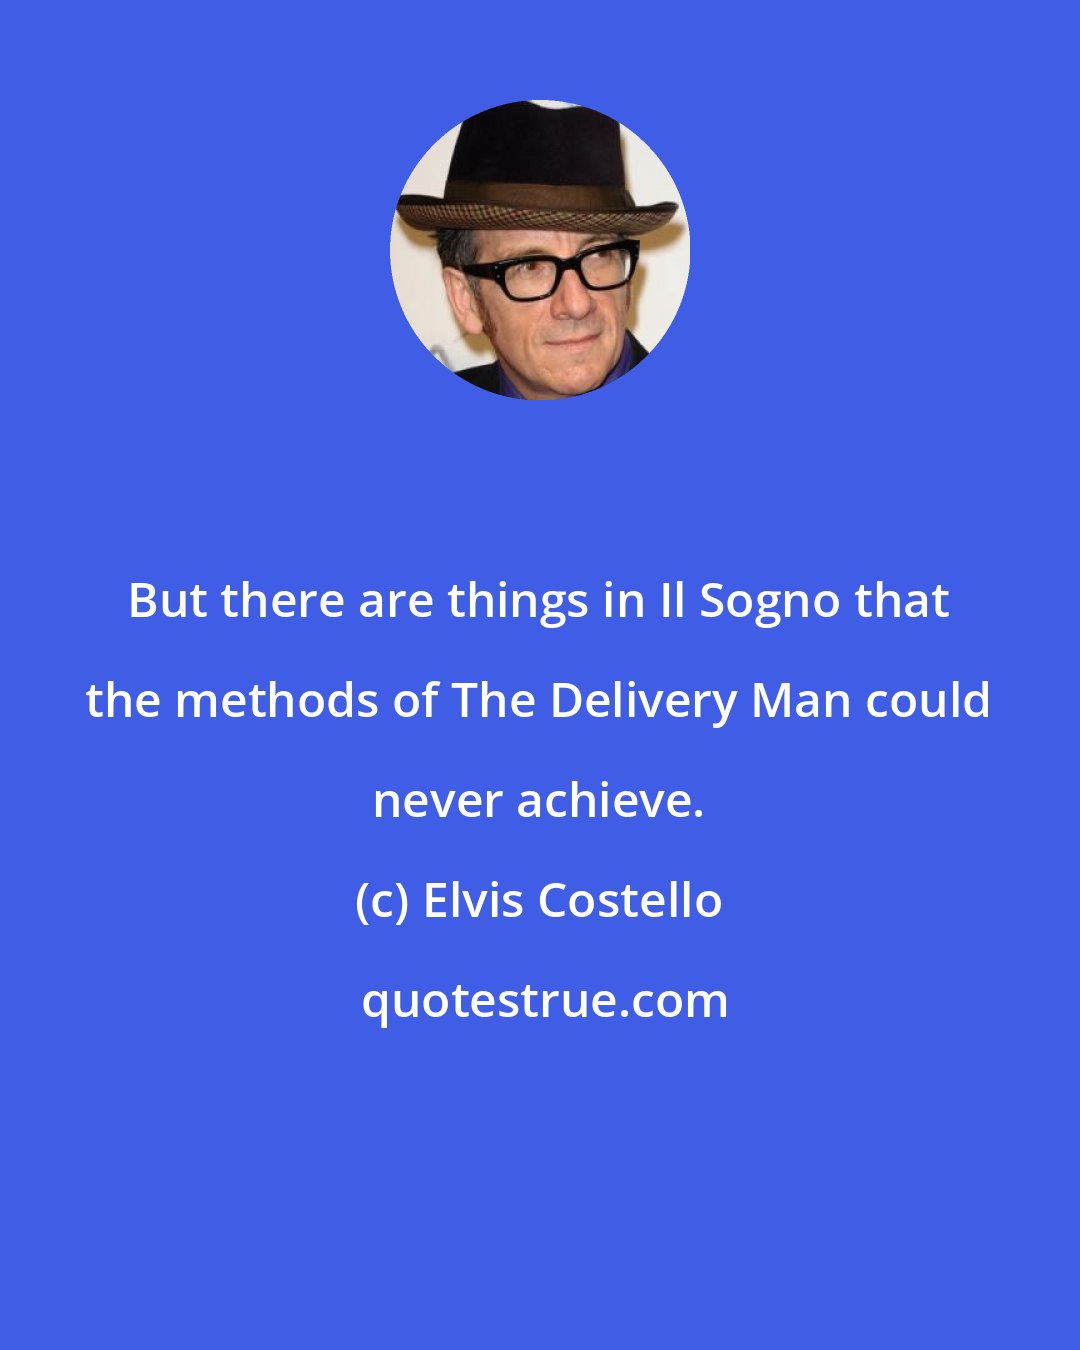 Elvis Costello: But there are things in Il Sogno that the methods of The Delivery Man could never achieve.